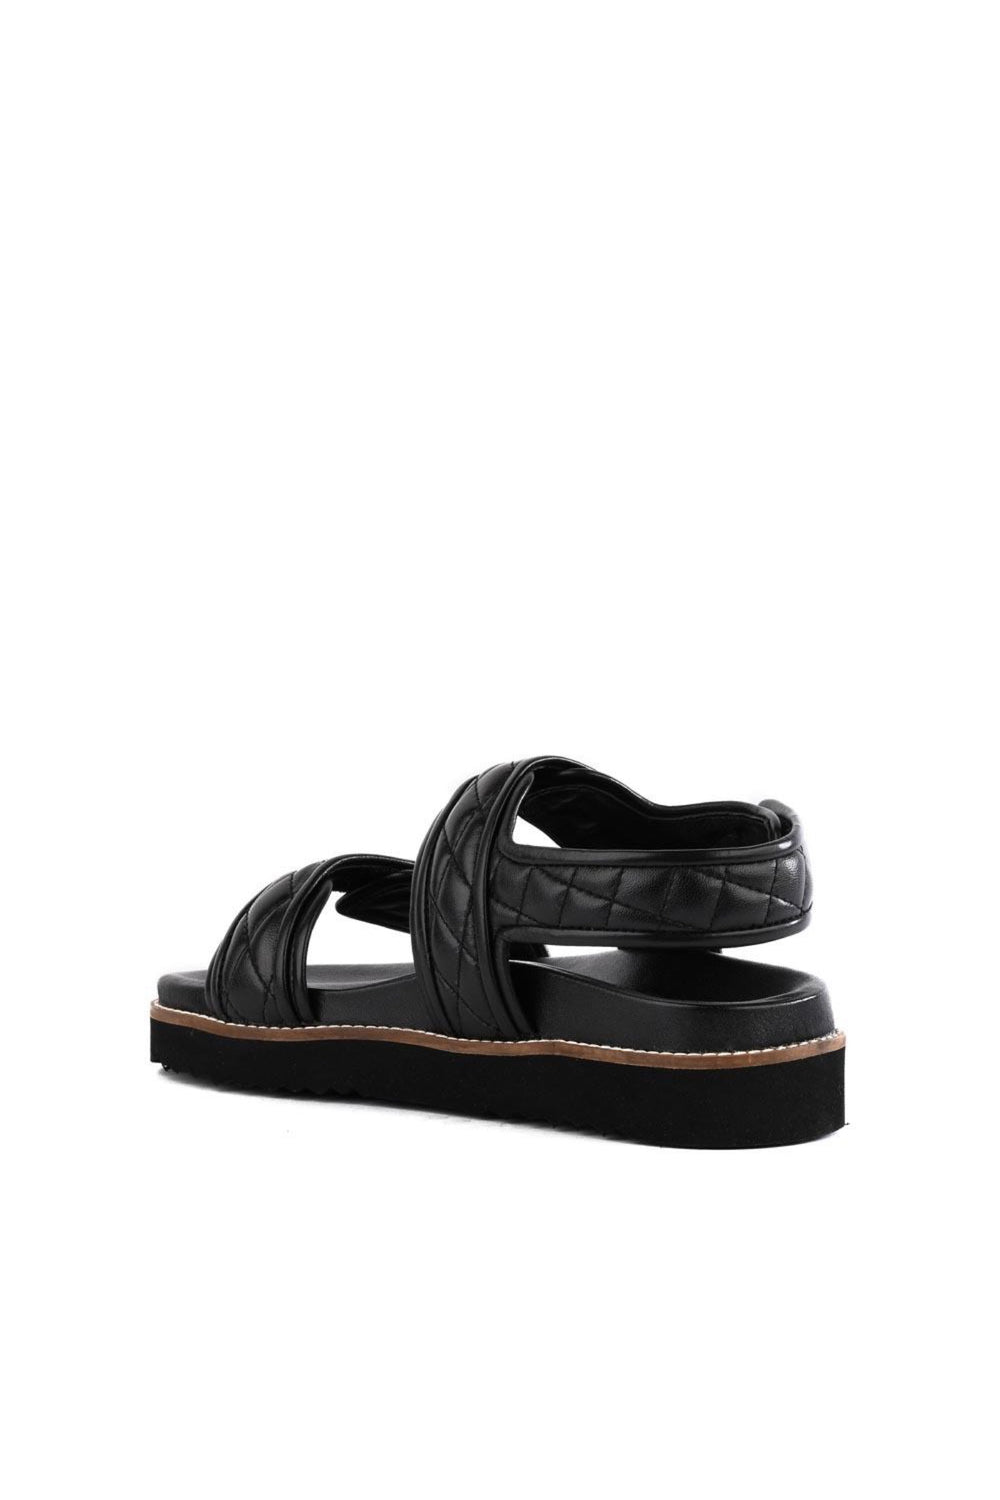 Black New To This Sandal